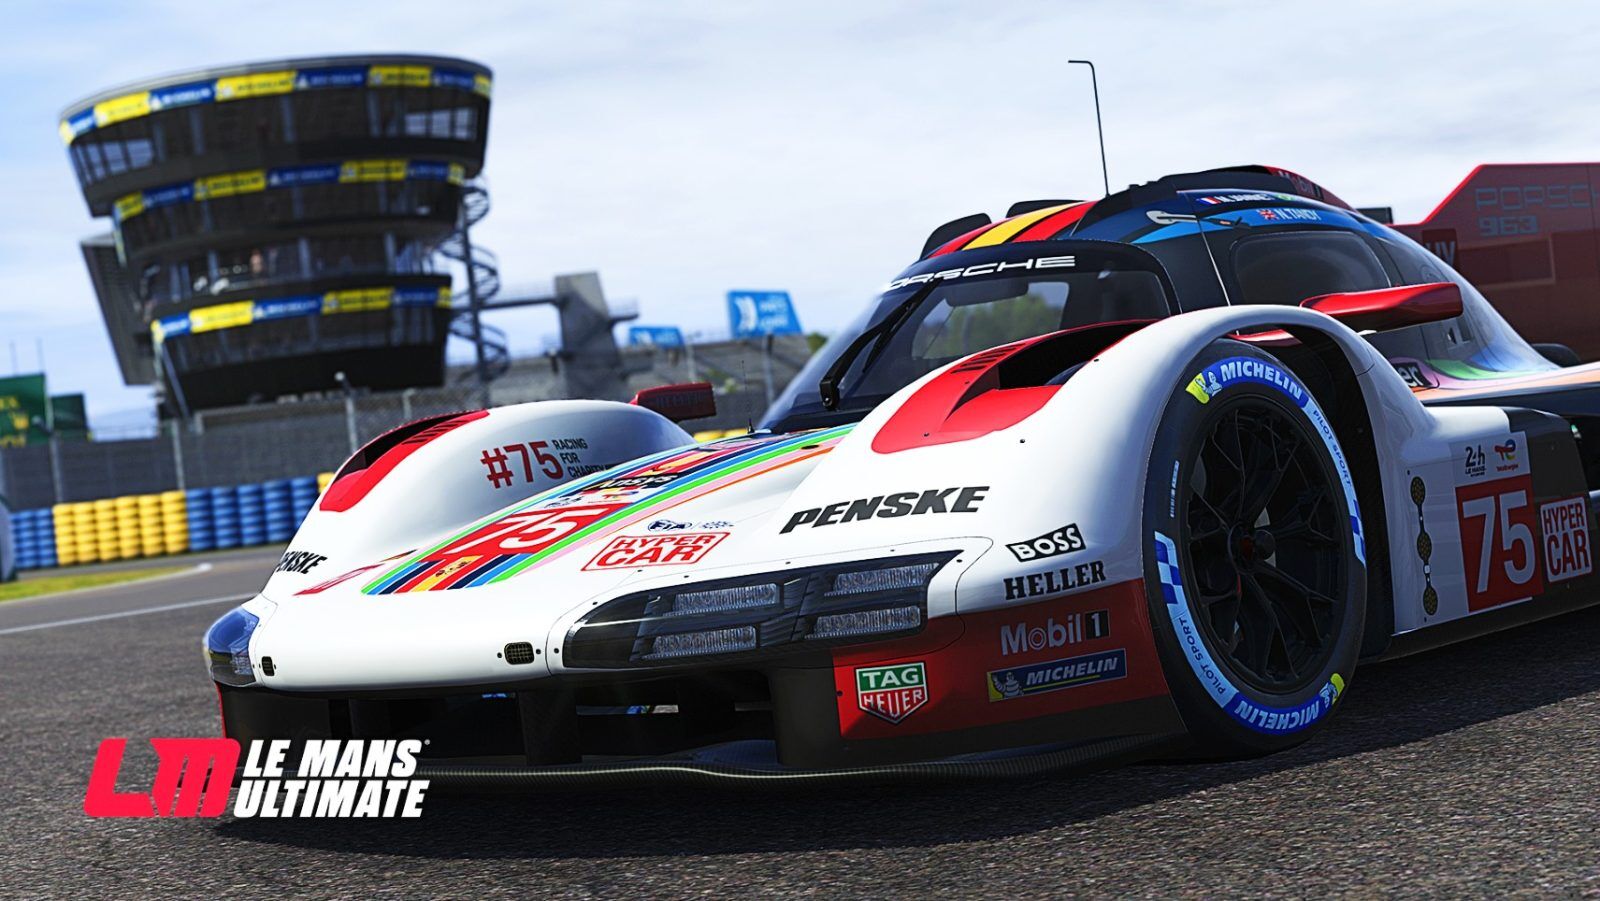 An image of the Porsche 963 in Le Mans Ultimate.